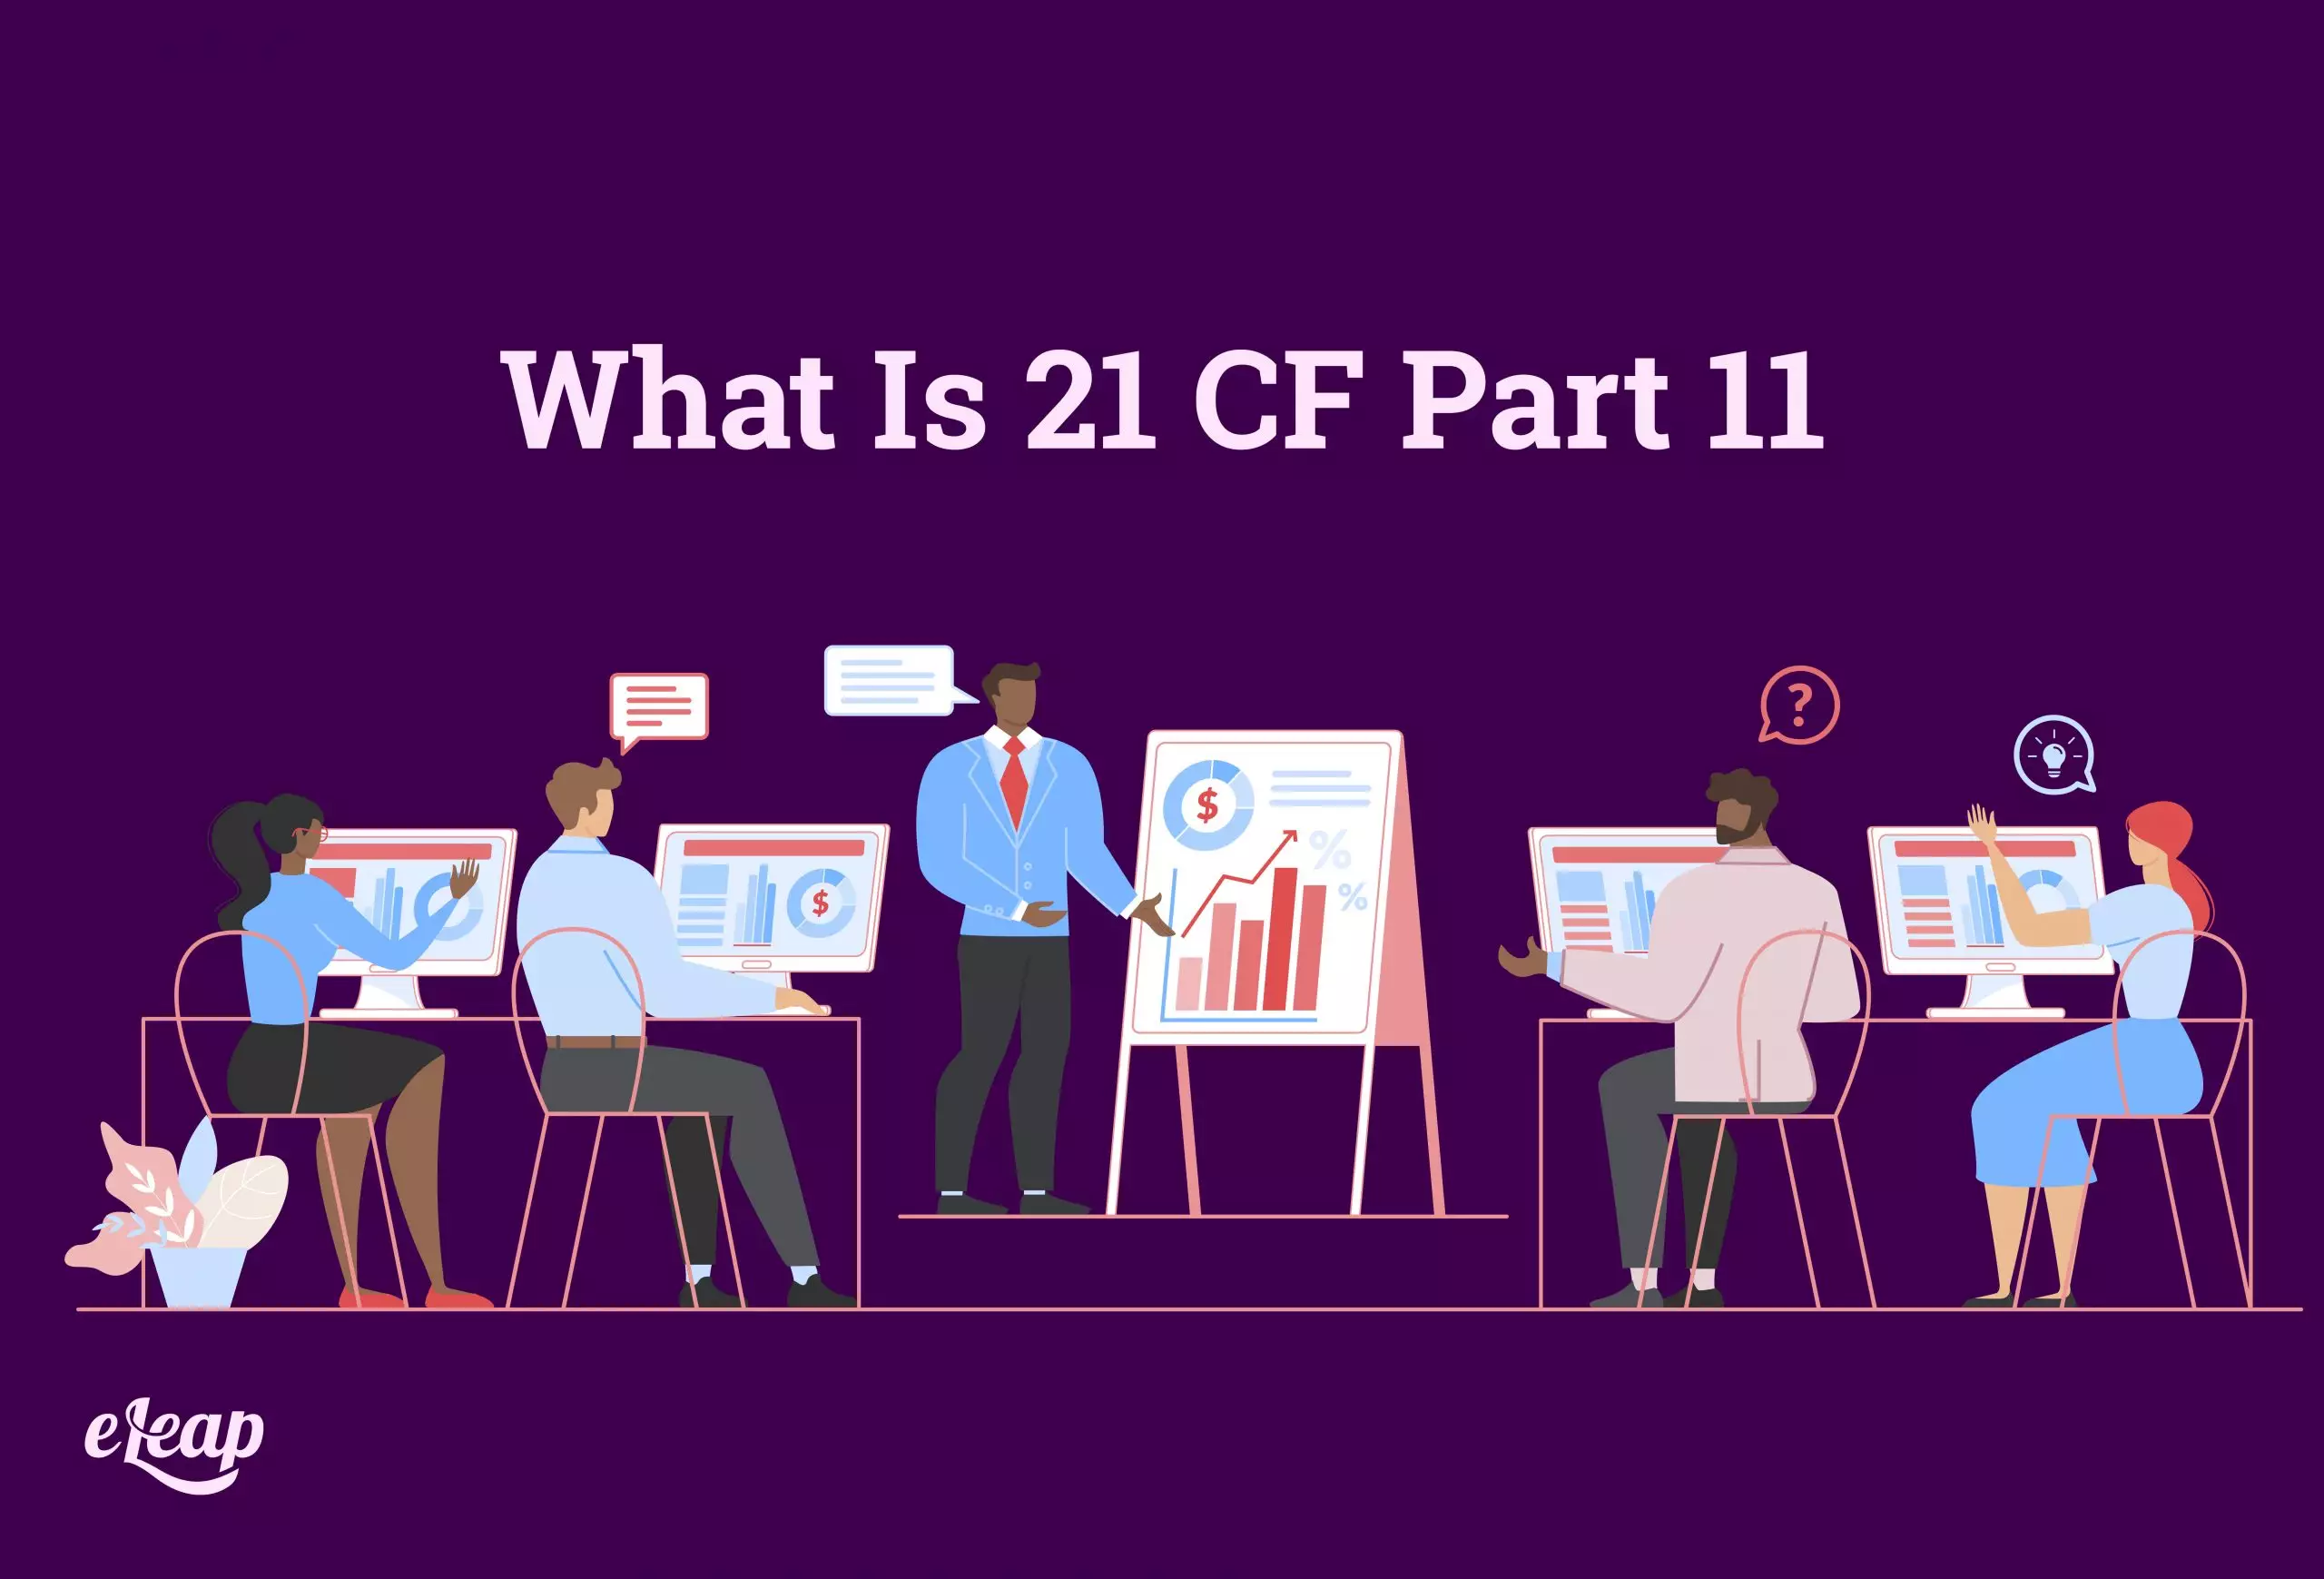 What Is 21 CF Part 11